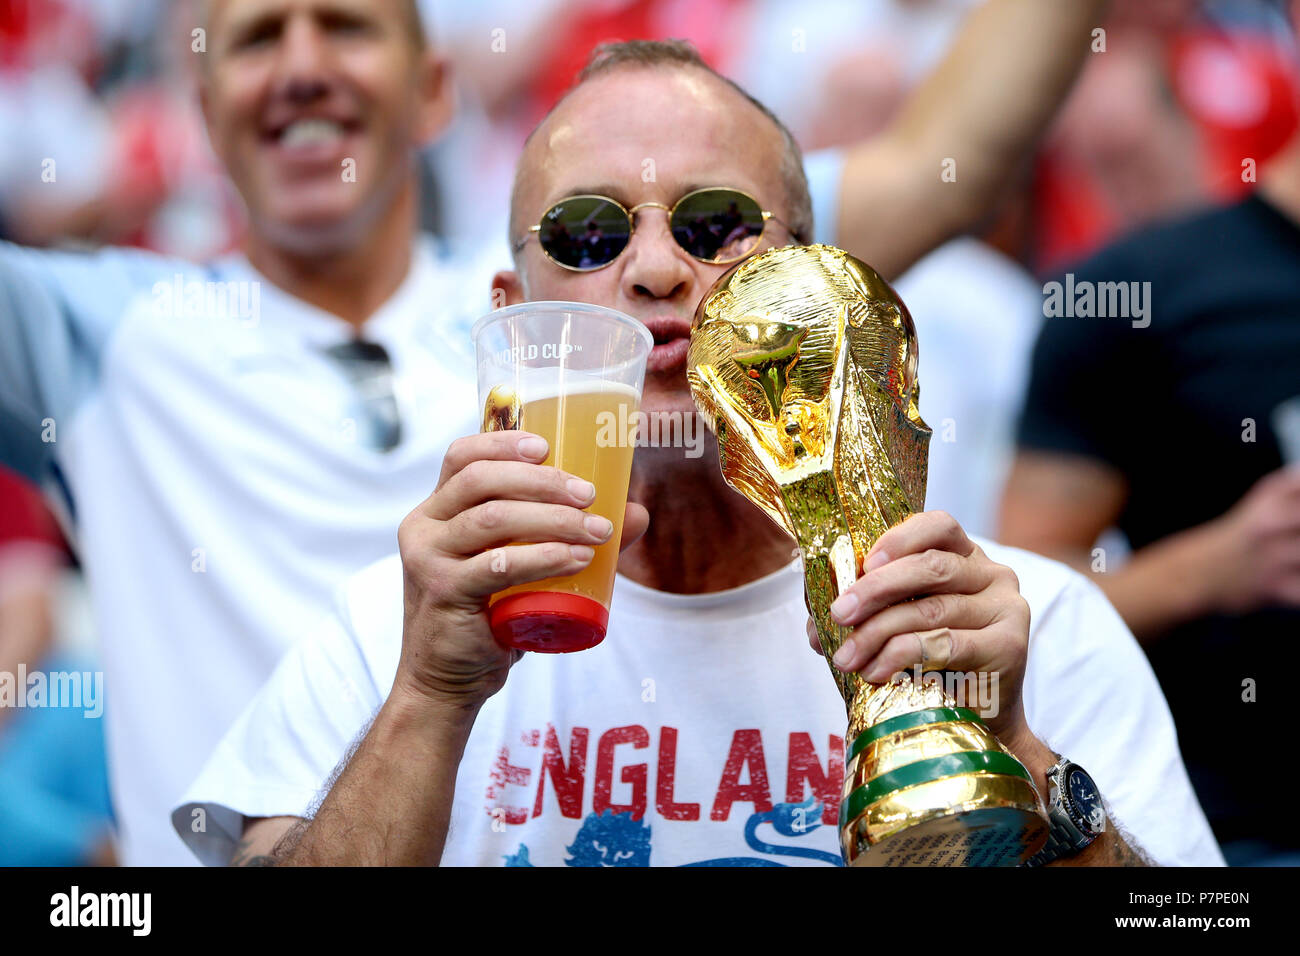 An England fan in the stands holds up a replica of the 2018 FIFA World Cup trophy before the FIFA World Cup, Quarter Final match at the Samara Stadium Stock Photo